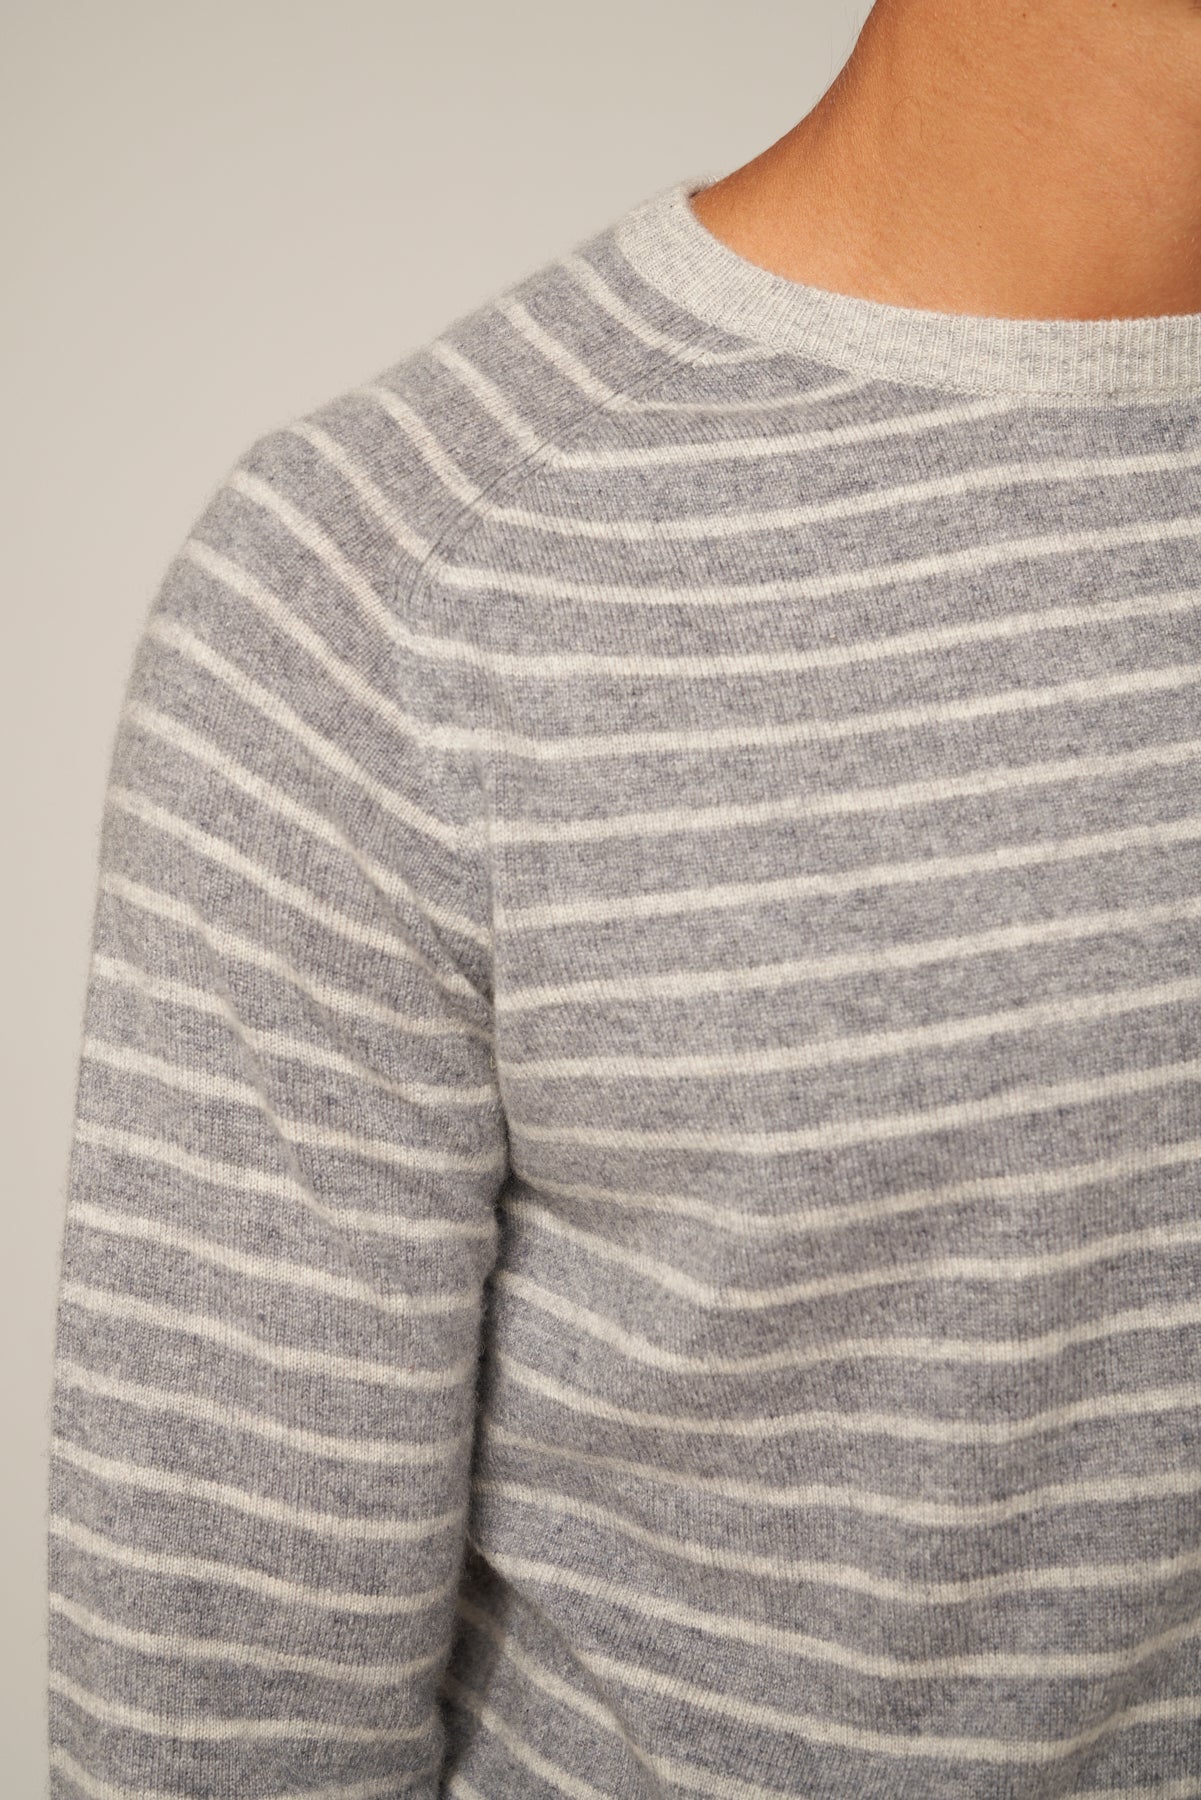 Cashmere | Long Sleeve Sweater | Winter Sweater | Bellemere New York